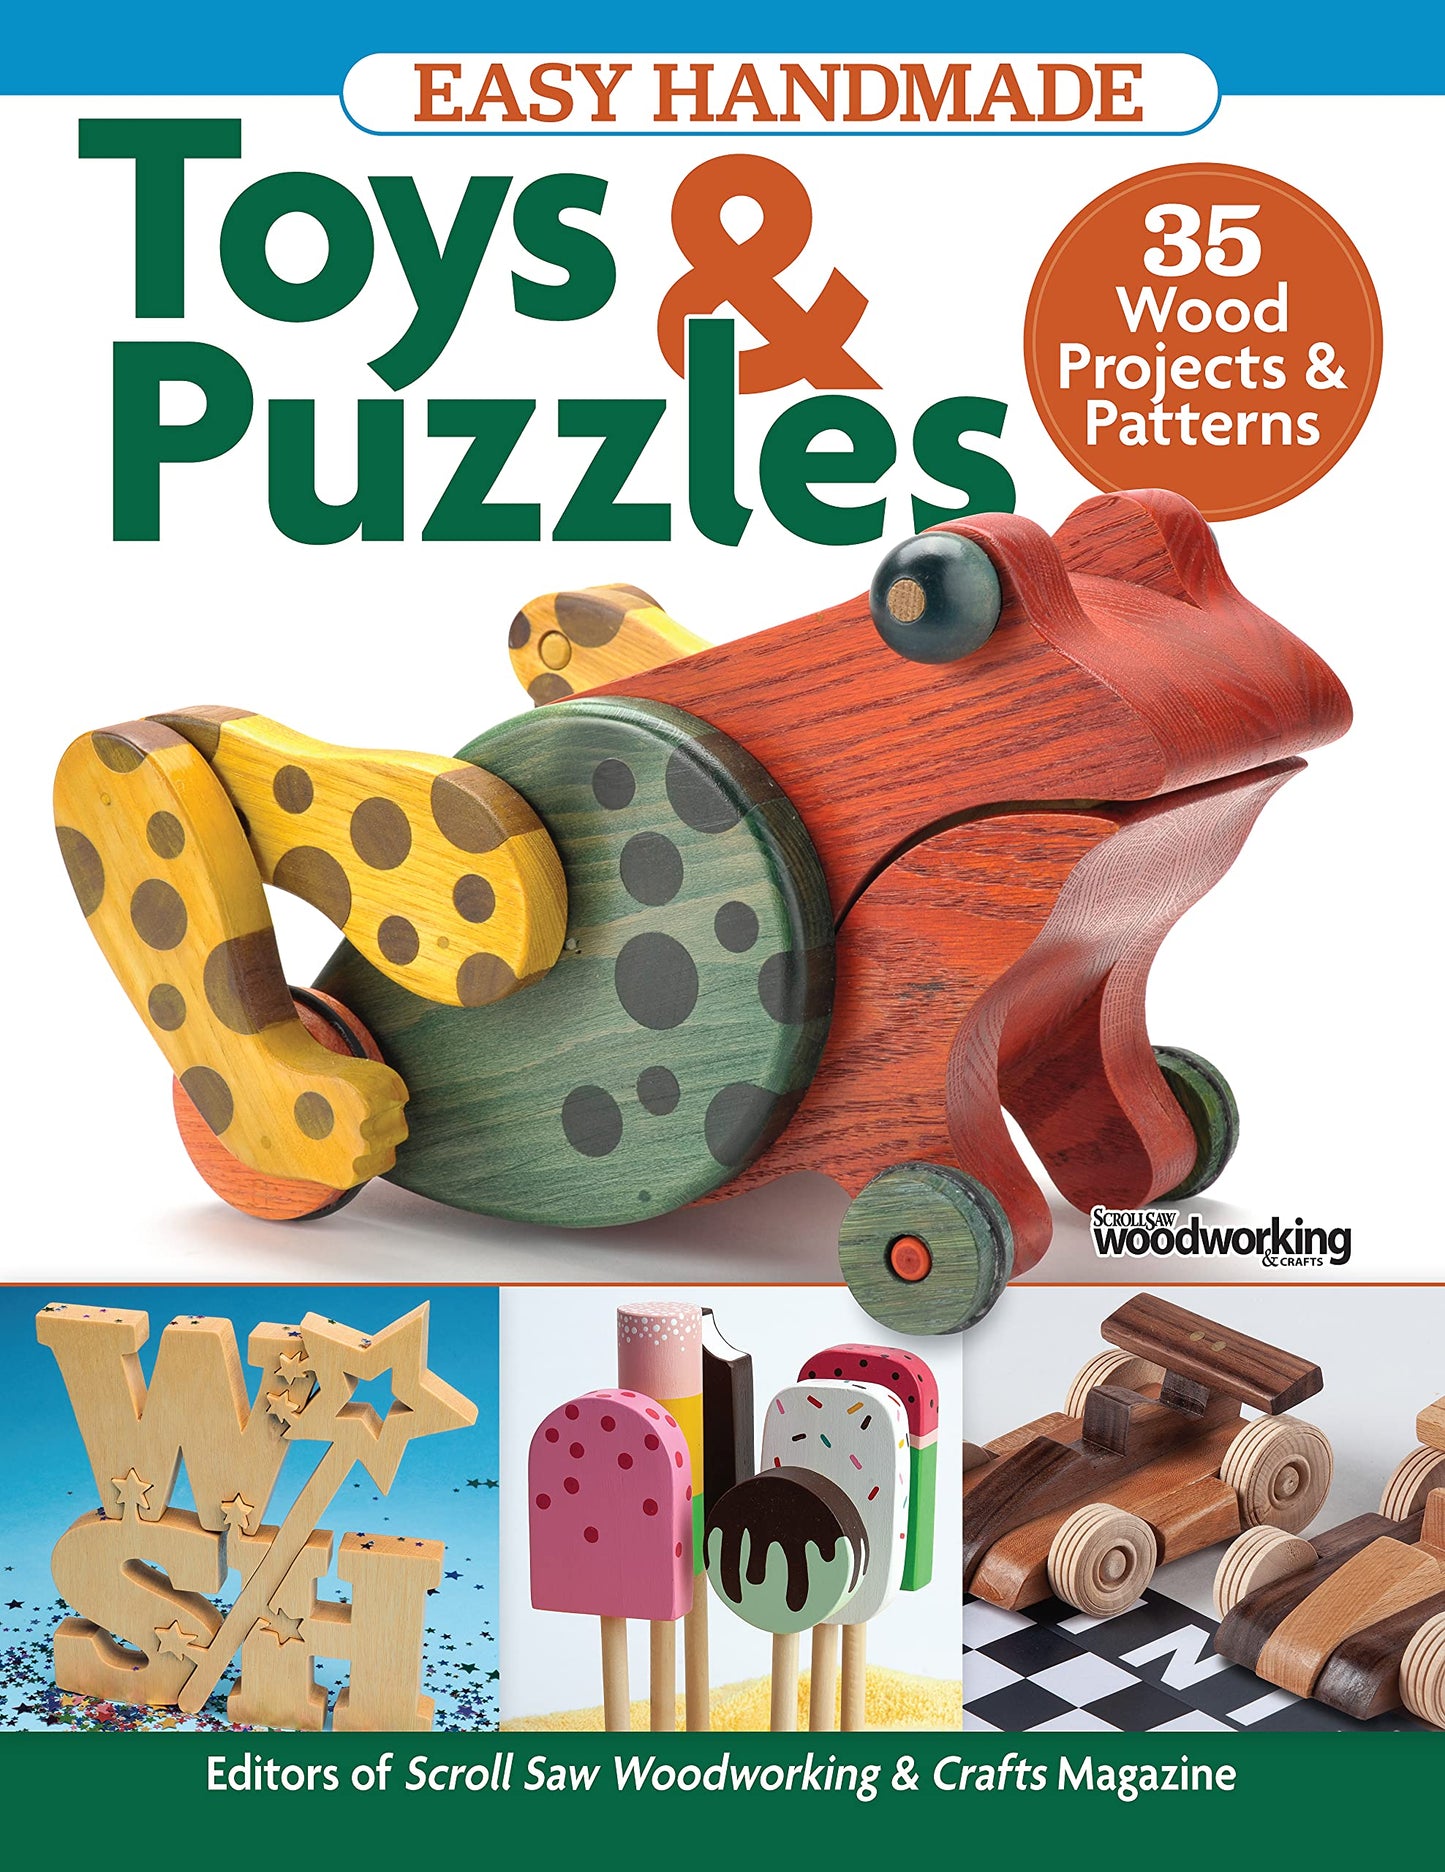 Easy Handmade Toys & Puzzles: 35 Wood Projects & Patterns (Fox Chapel Publishing) Compilation from Scroll Saw Woodworking & Crafts Magazine for